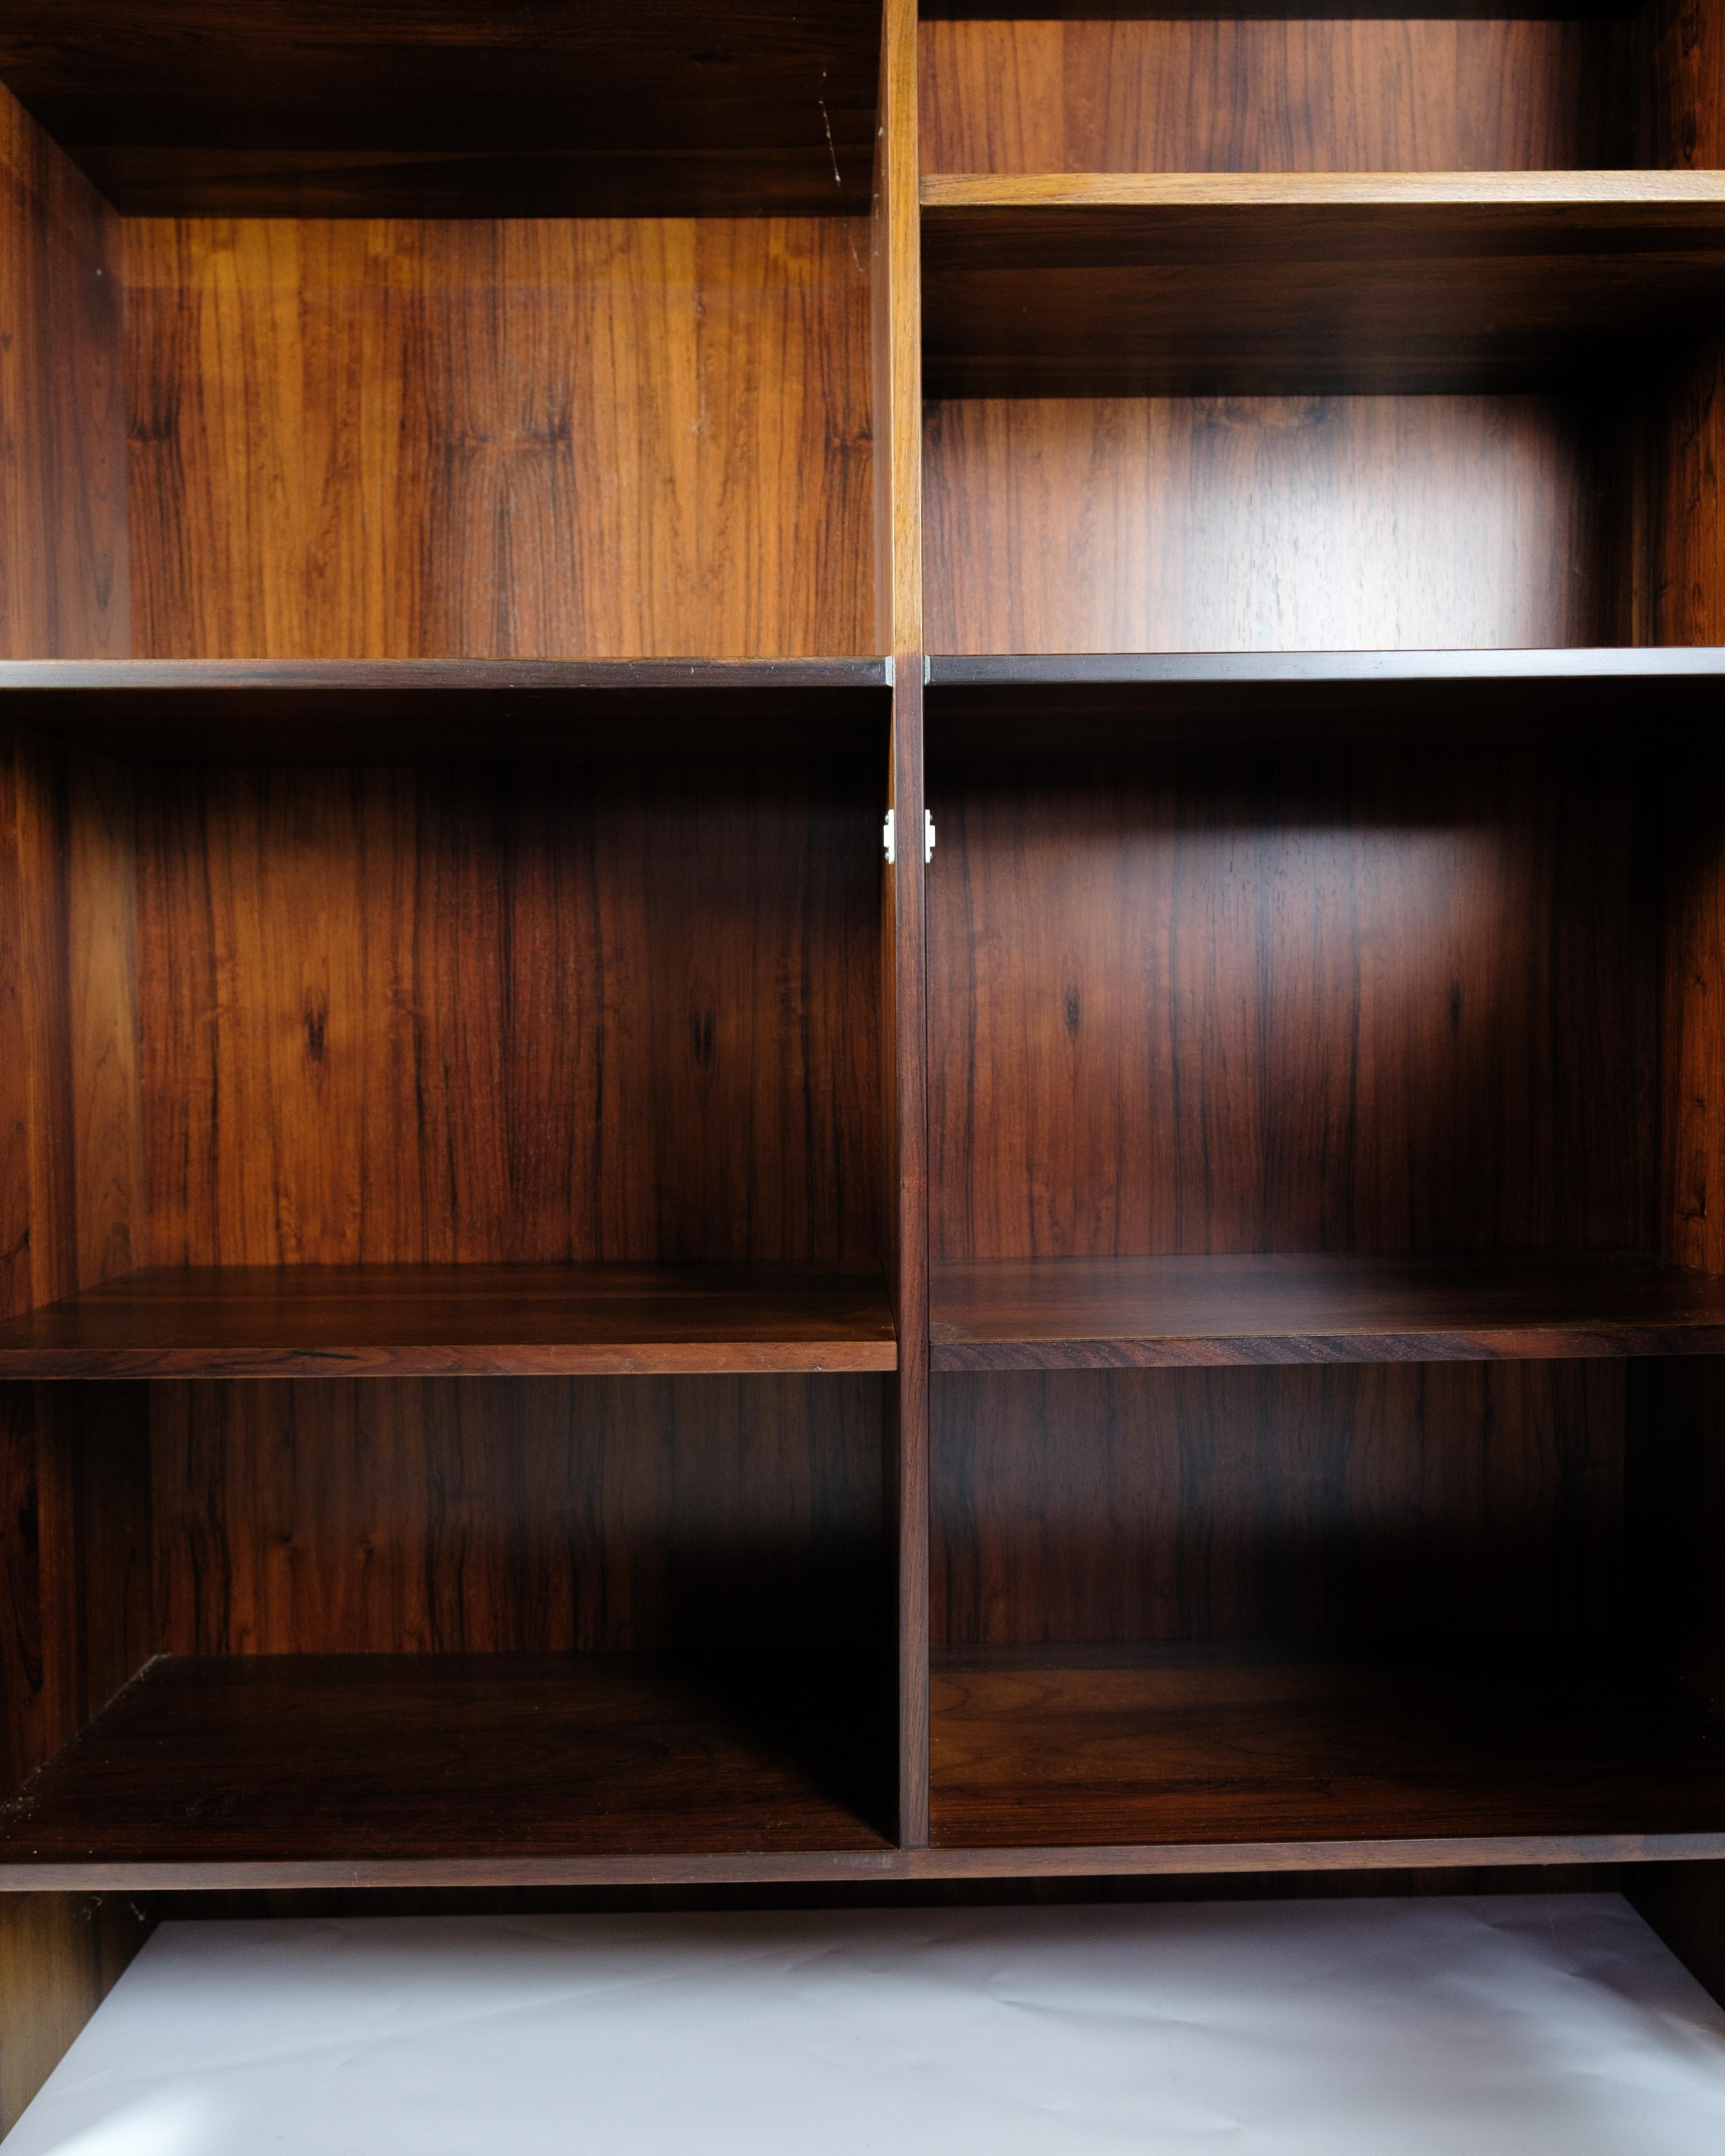 Mid-20th Century Bookcase Made In Rosewood, Danish Design From 1960s For Sale